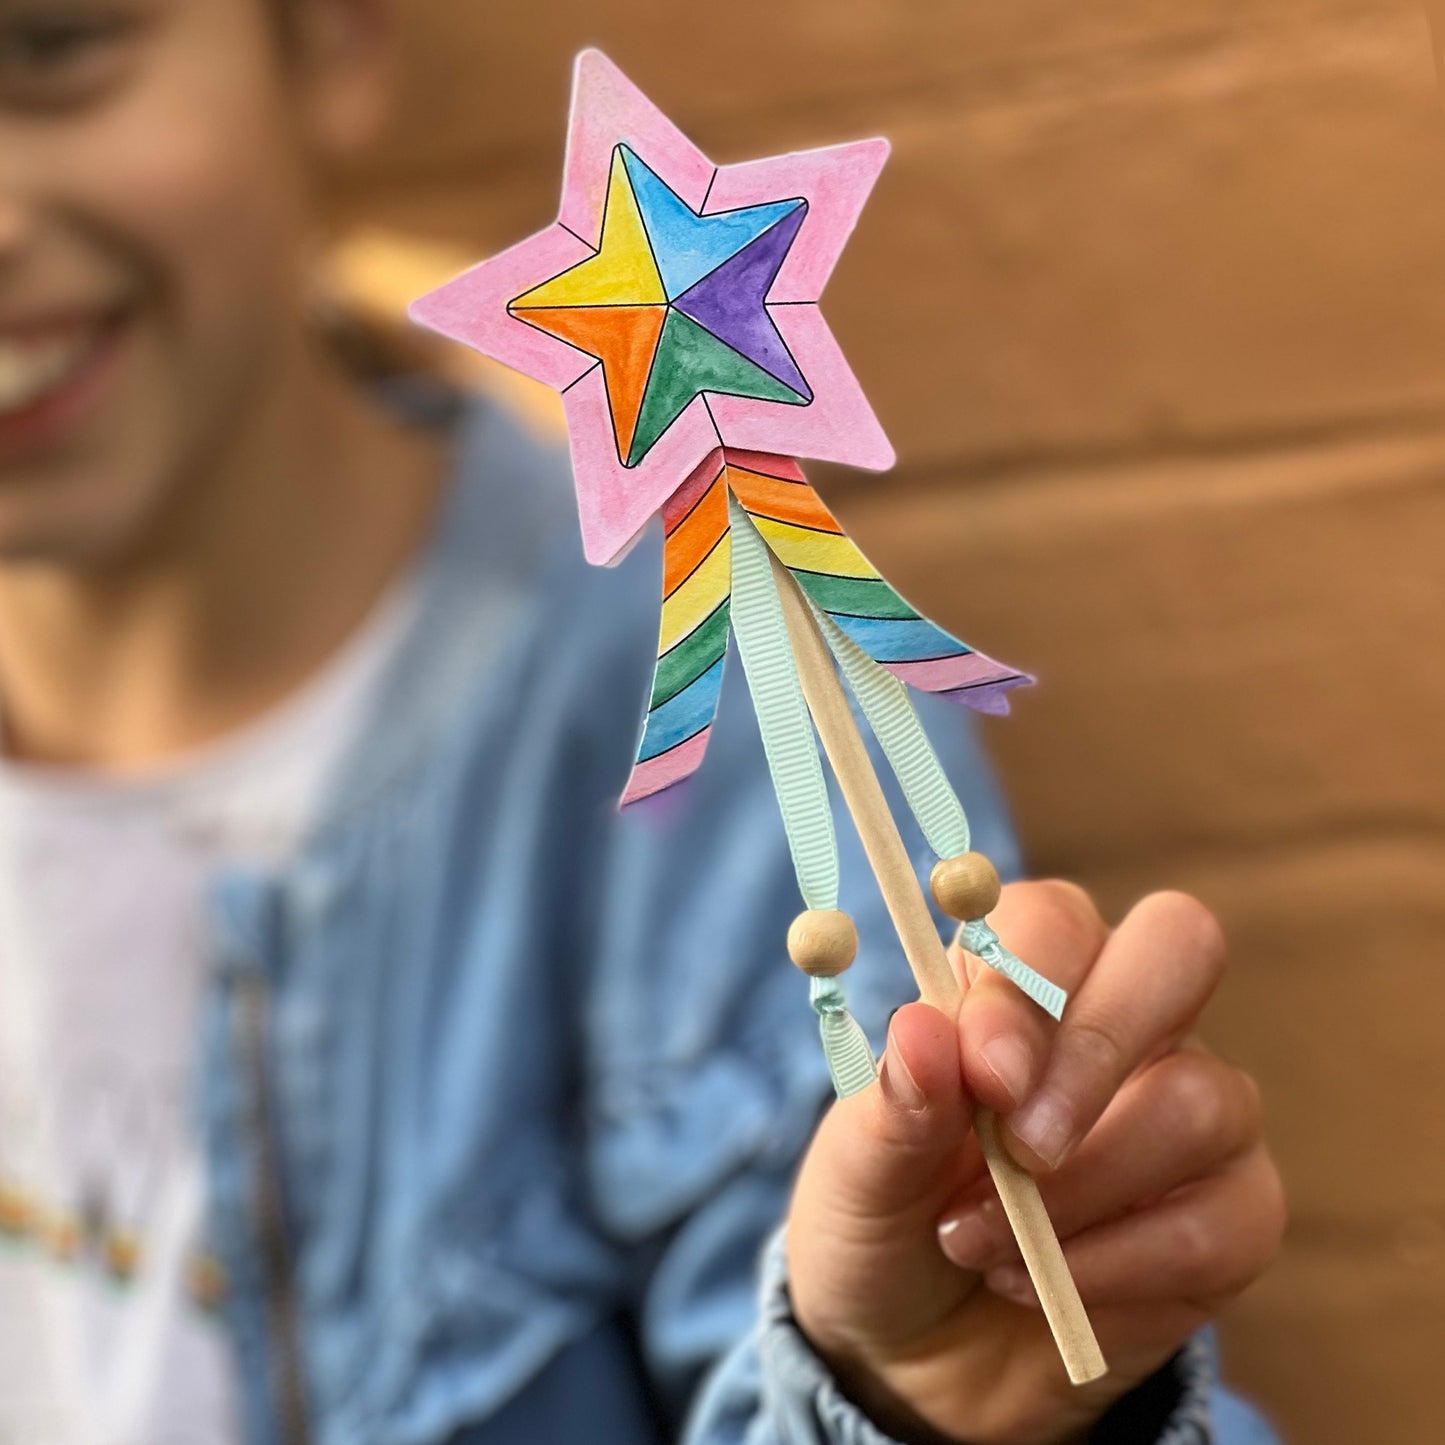 Children can colour the star & ribbon cut outs with their chosen pattern, then it's time to construct their wand. Once the stick & ribbons are taped on, the stars can be stuck together. Beads can be added to the base of the ribbons for additional effect. Time to wave those wands & spread the magic. Each kit is plastic free & lovingly assembled by hand.